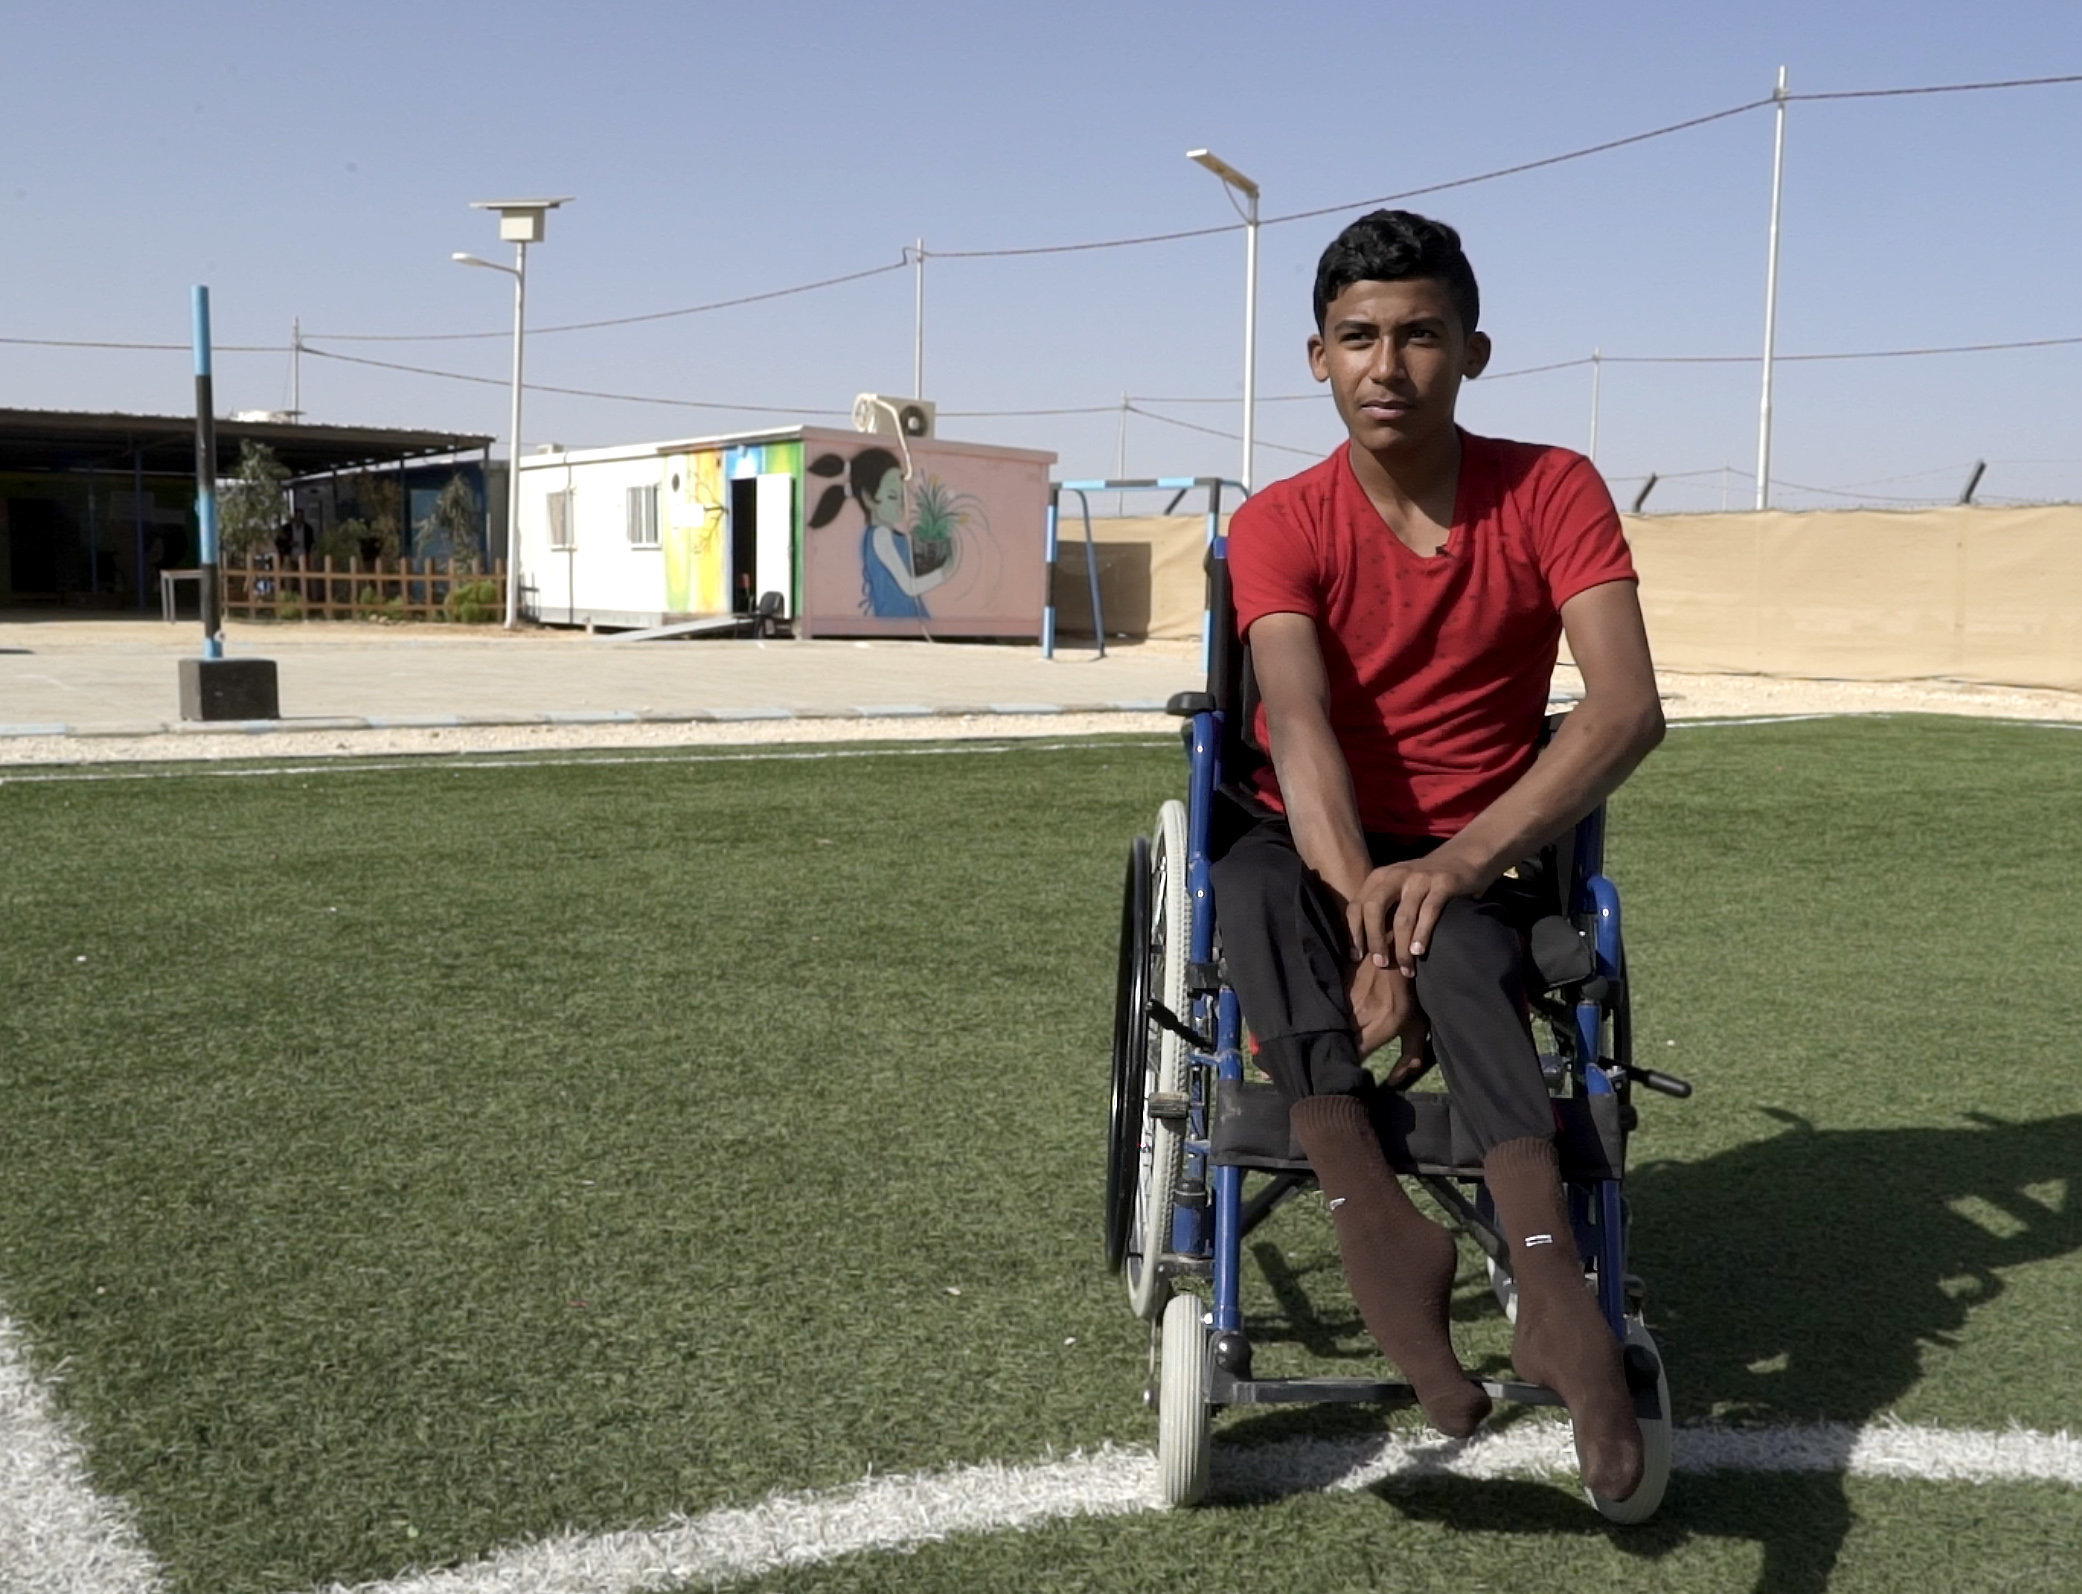 <strong>Ala'a's&nbsp;disability meant extremists would attempt to target him</strong>